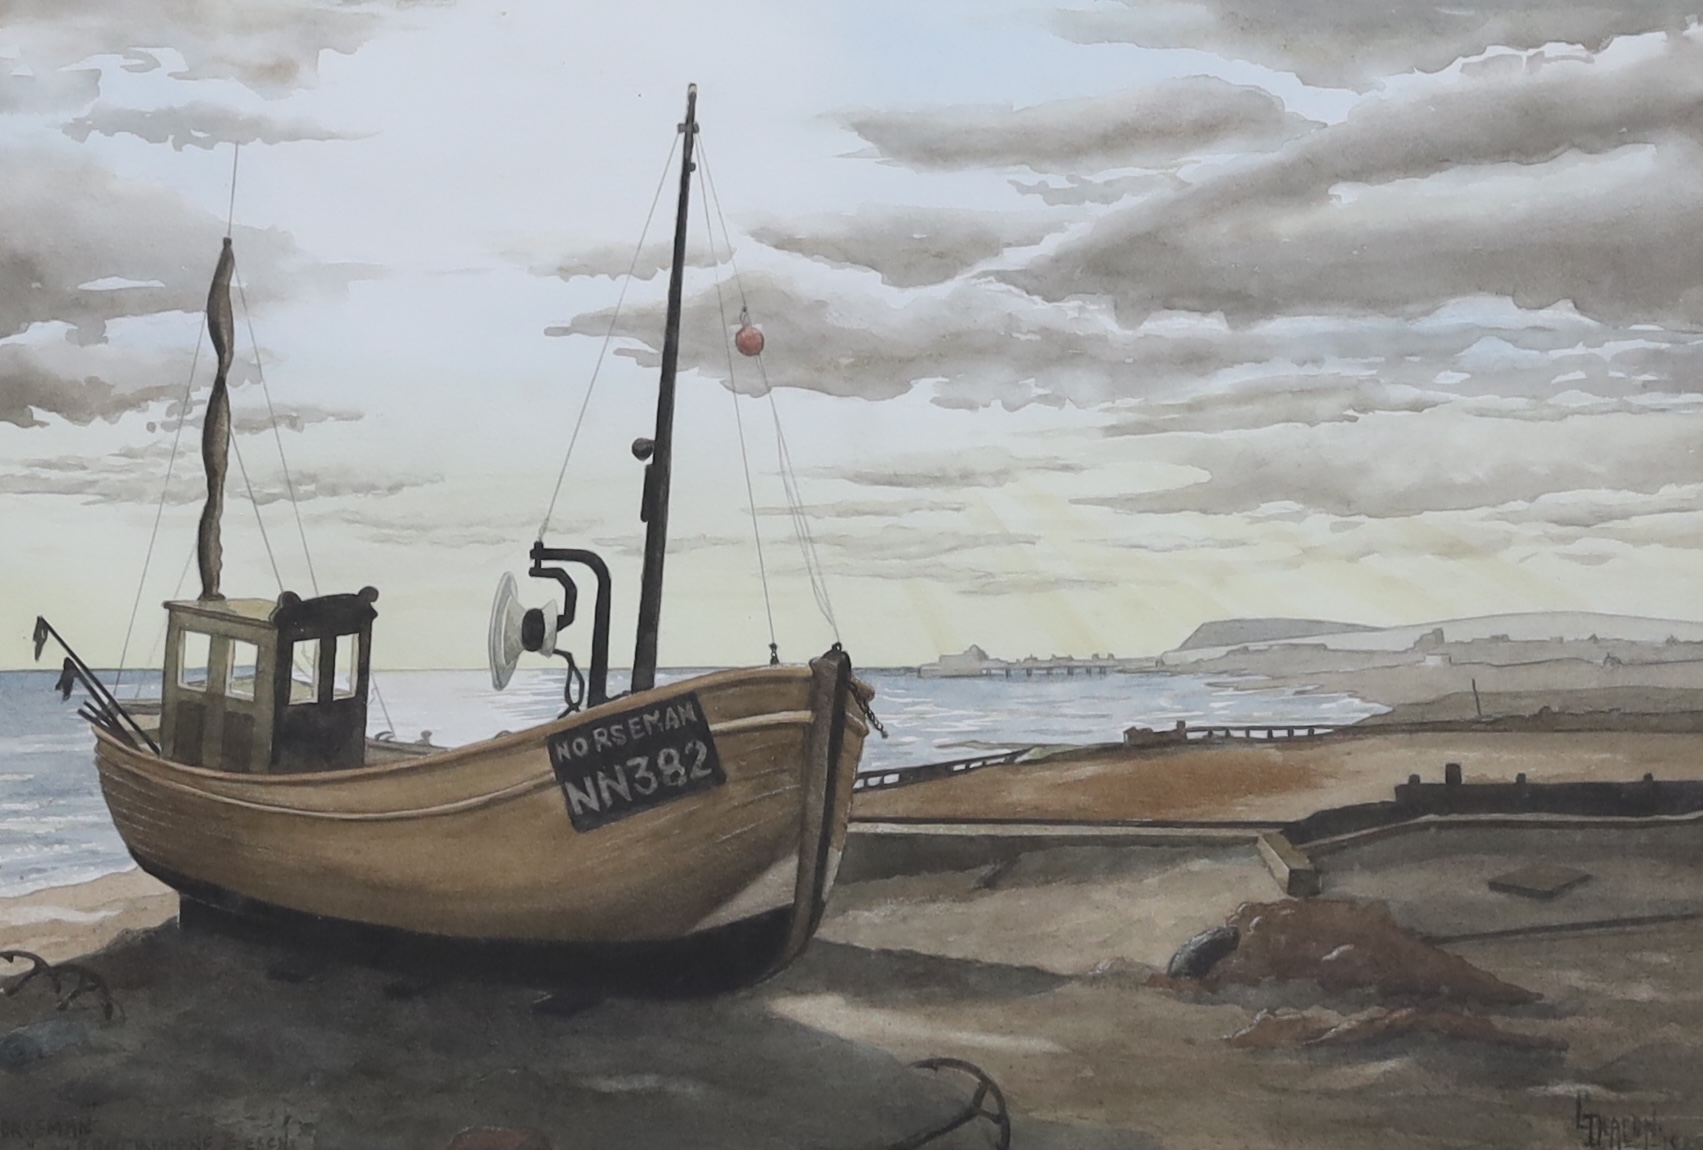 L Deacon, watercolour, 'Northman fishing boat on Eastbourne beach', signed and dated 1988, 28 x 40cm